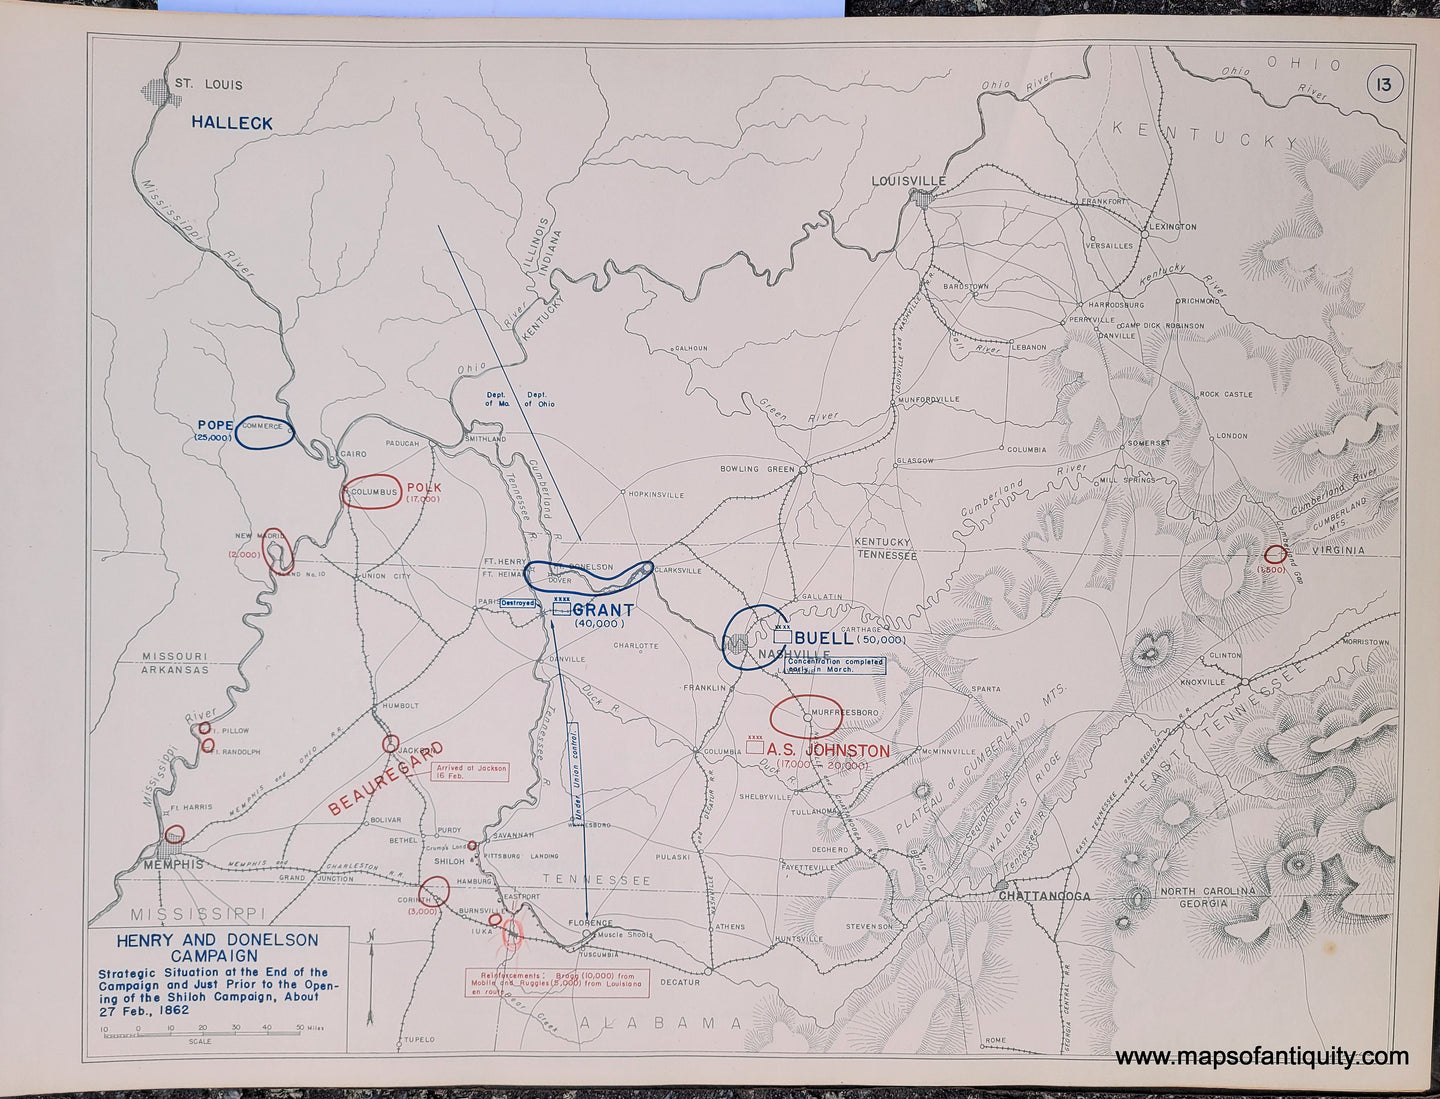 Genuine-Antique-Map-Henry-and-Donelson-Campaign-Strategic-Situation-at-the-End-of-the-Campaign-and-Just-Prior-to-the-Opening-of-the-Shiloh-Campaign-About-27-Feb--1862-1948-Matthew-Forney-Steele-Dept-of-Military-Art-and-Engineering-US-Military-Academy-West-Point-Maps-Of-Antiquity